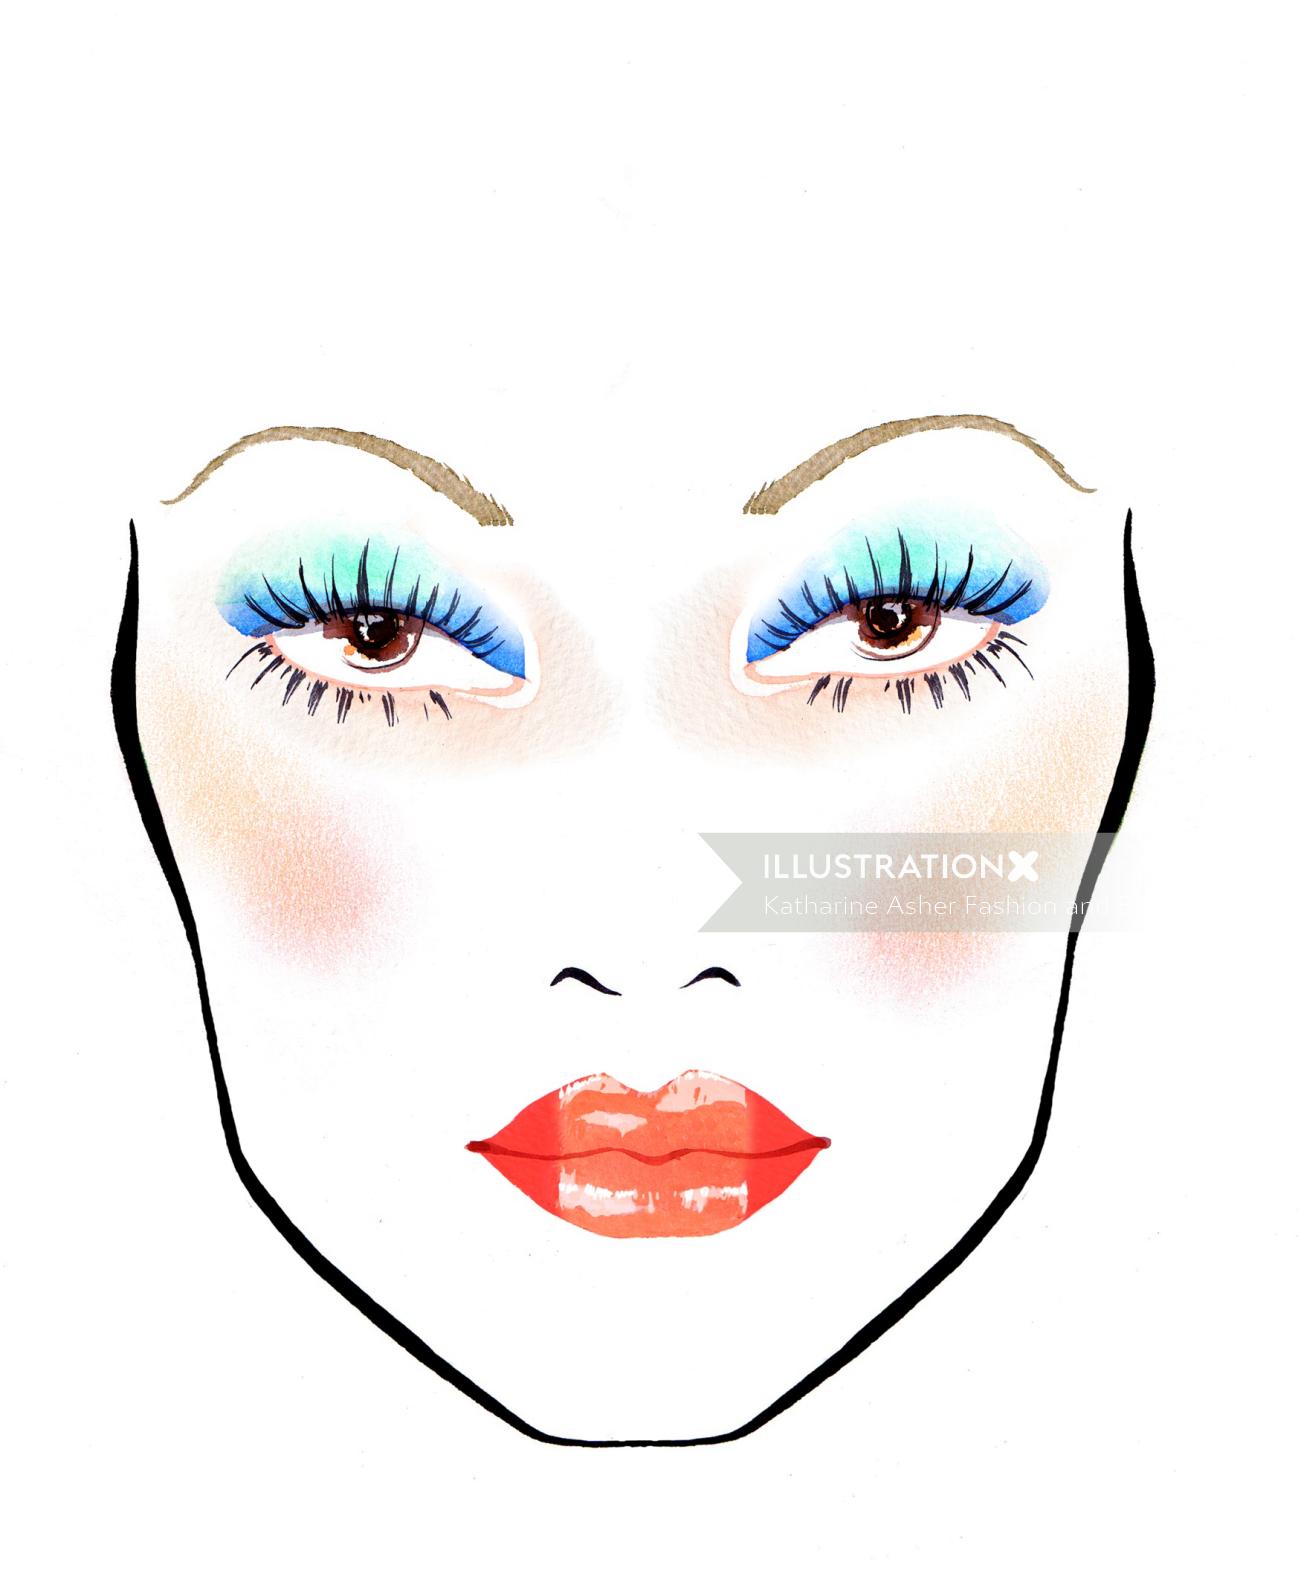 Beauty and Jewelry  Illustration by Katharine Asher Fashion and